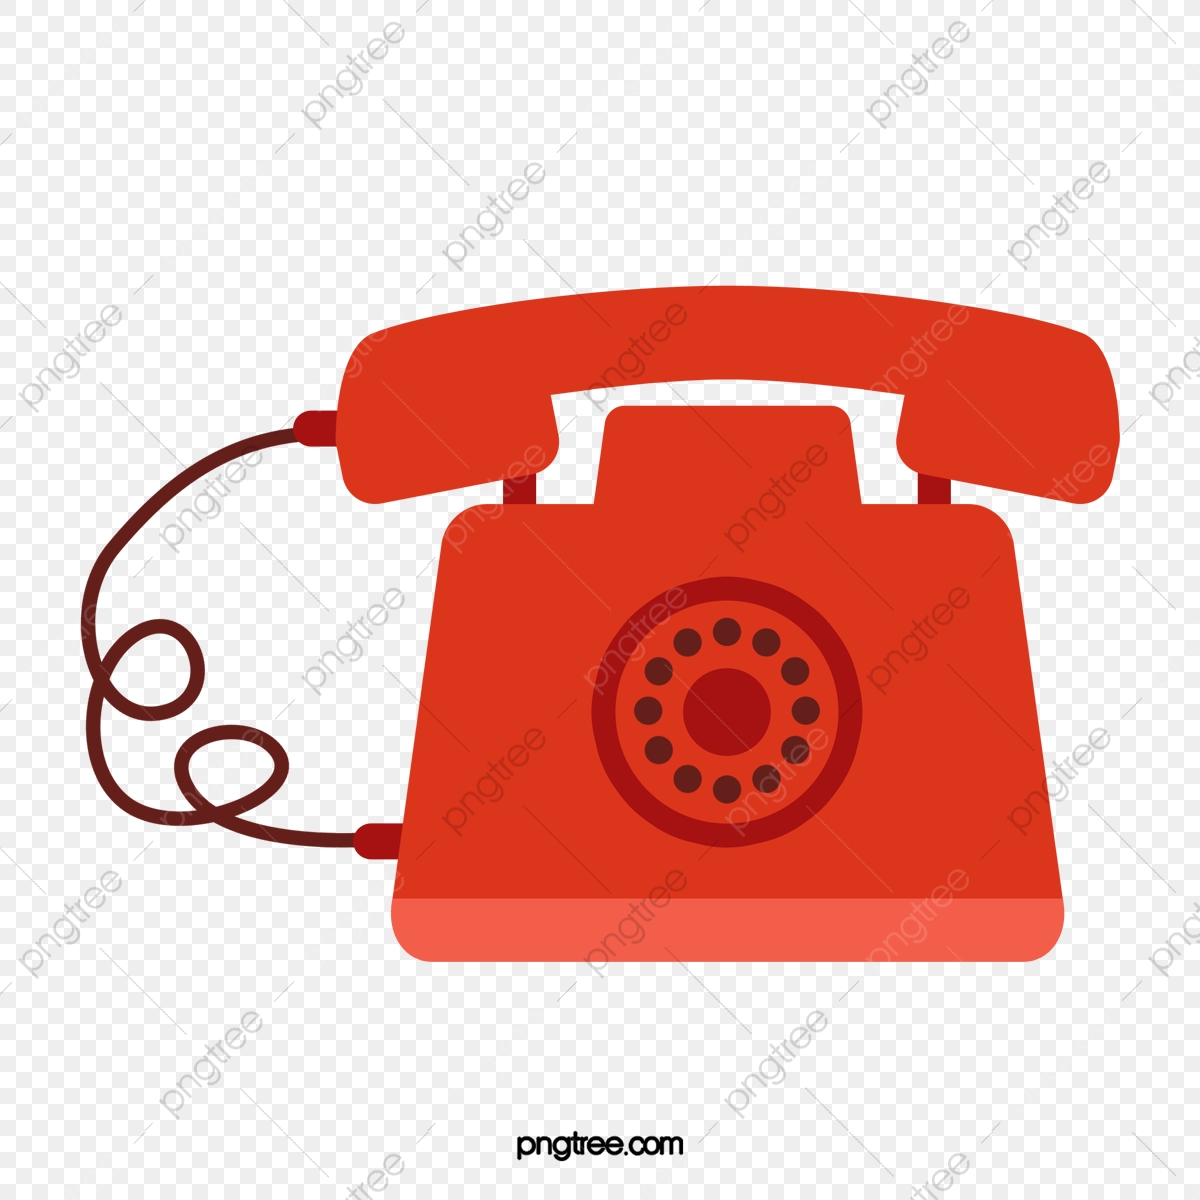 Telephone Vector at Vectorified.com | Collection of Telephone Vector